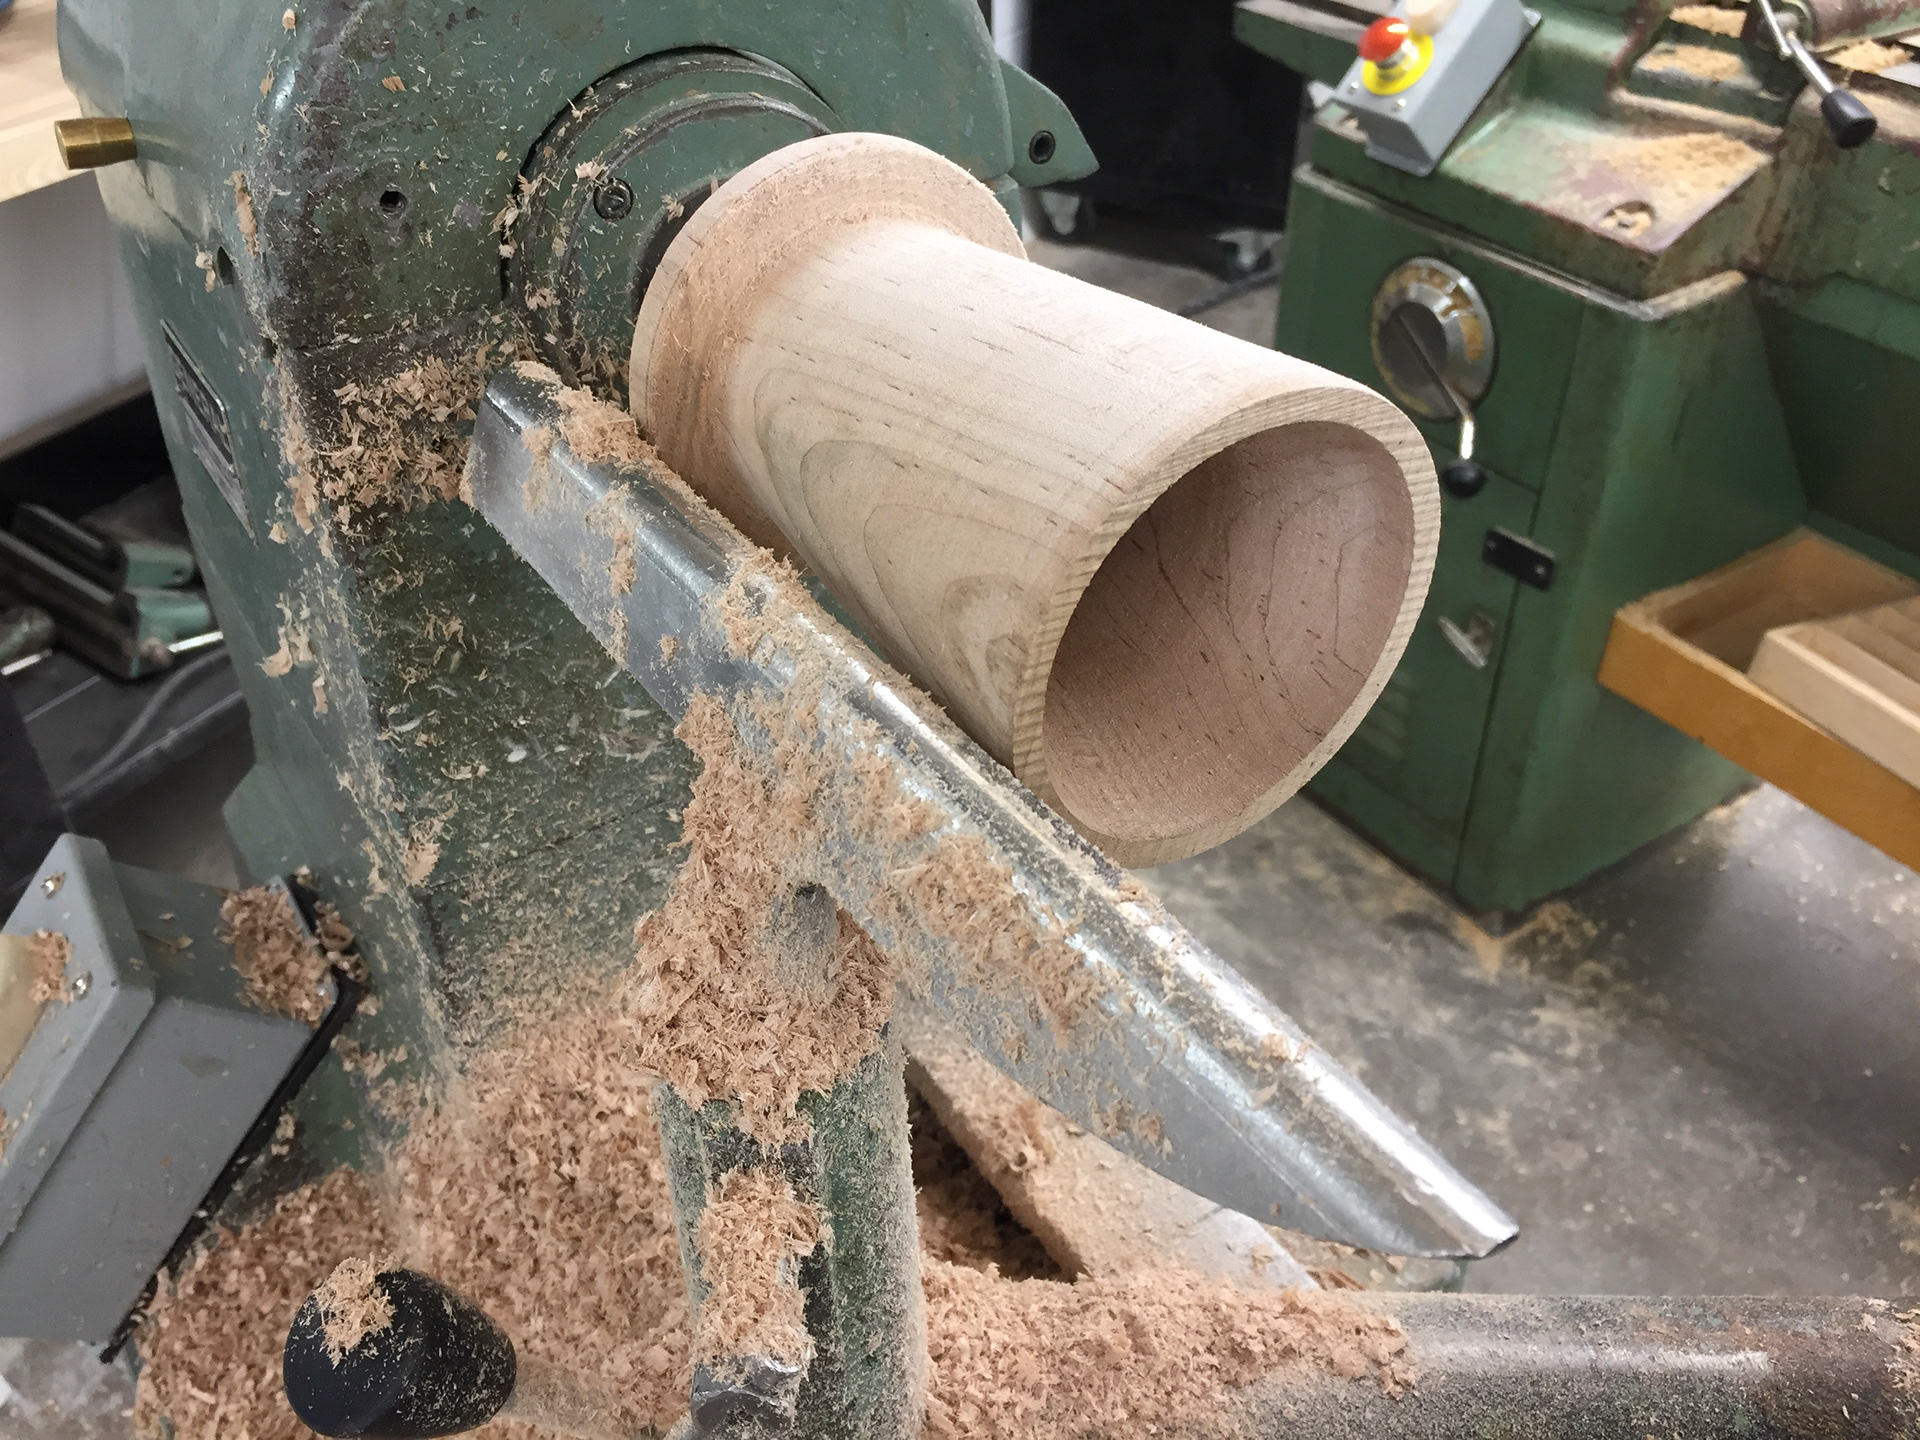 Woodturning a natural wood amplifier. A lot of wood dus--achoo! 2020